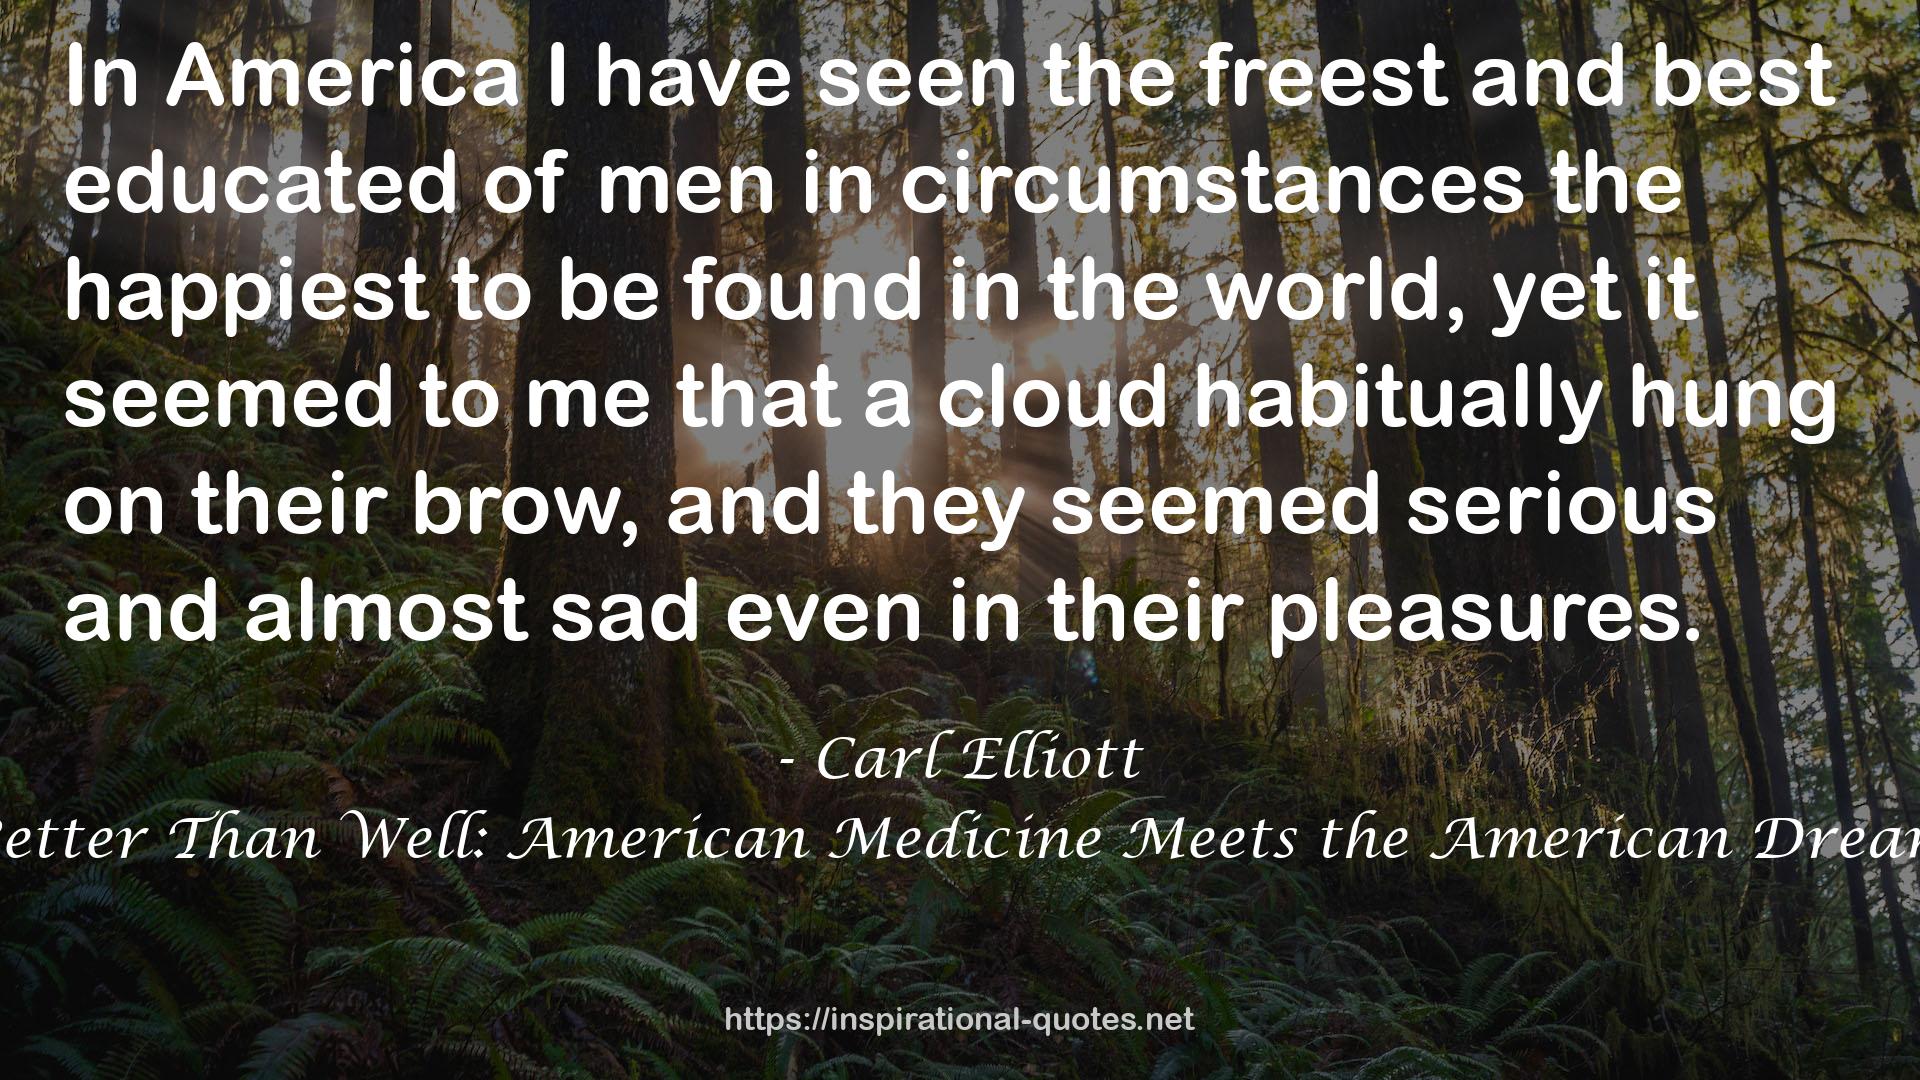 Better Than Well: American Medicine Meets the American Dream QUOTES